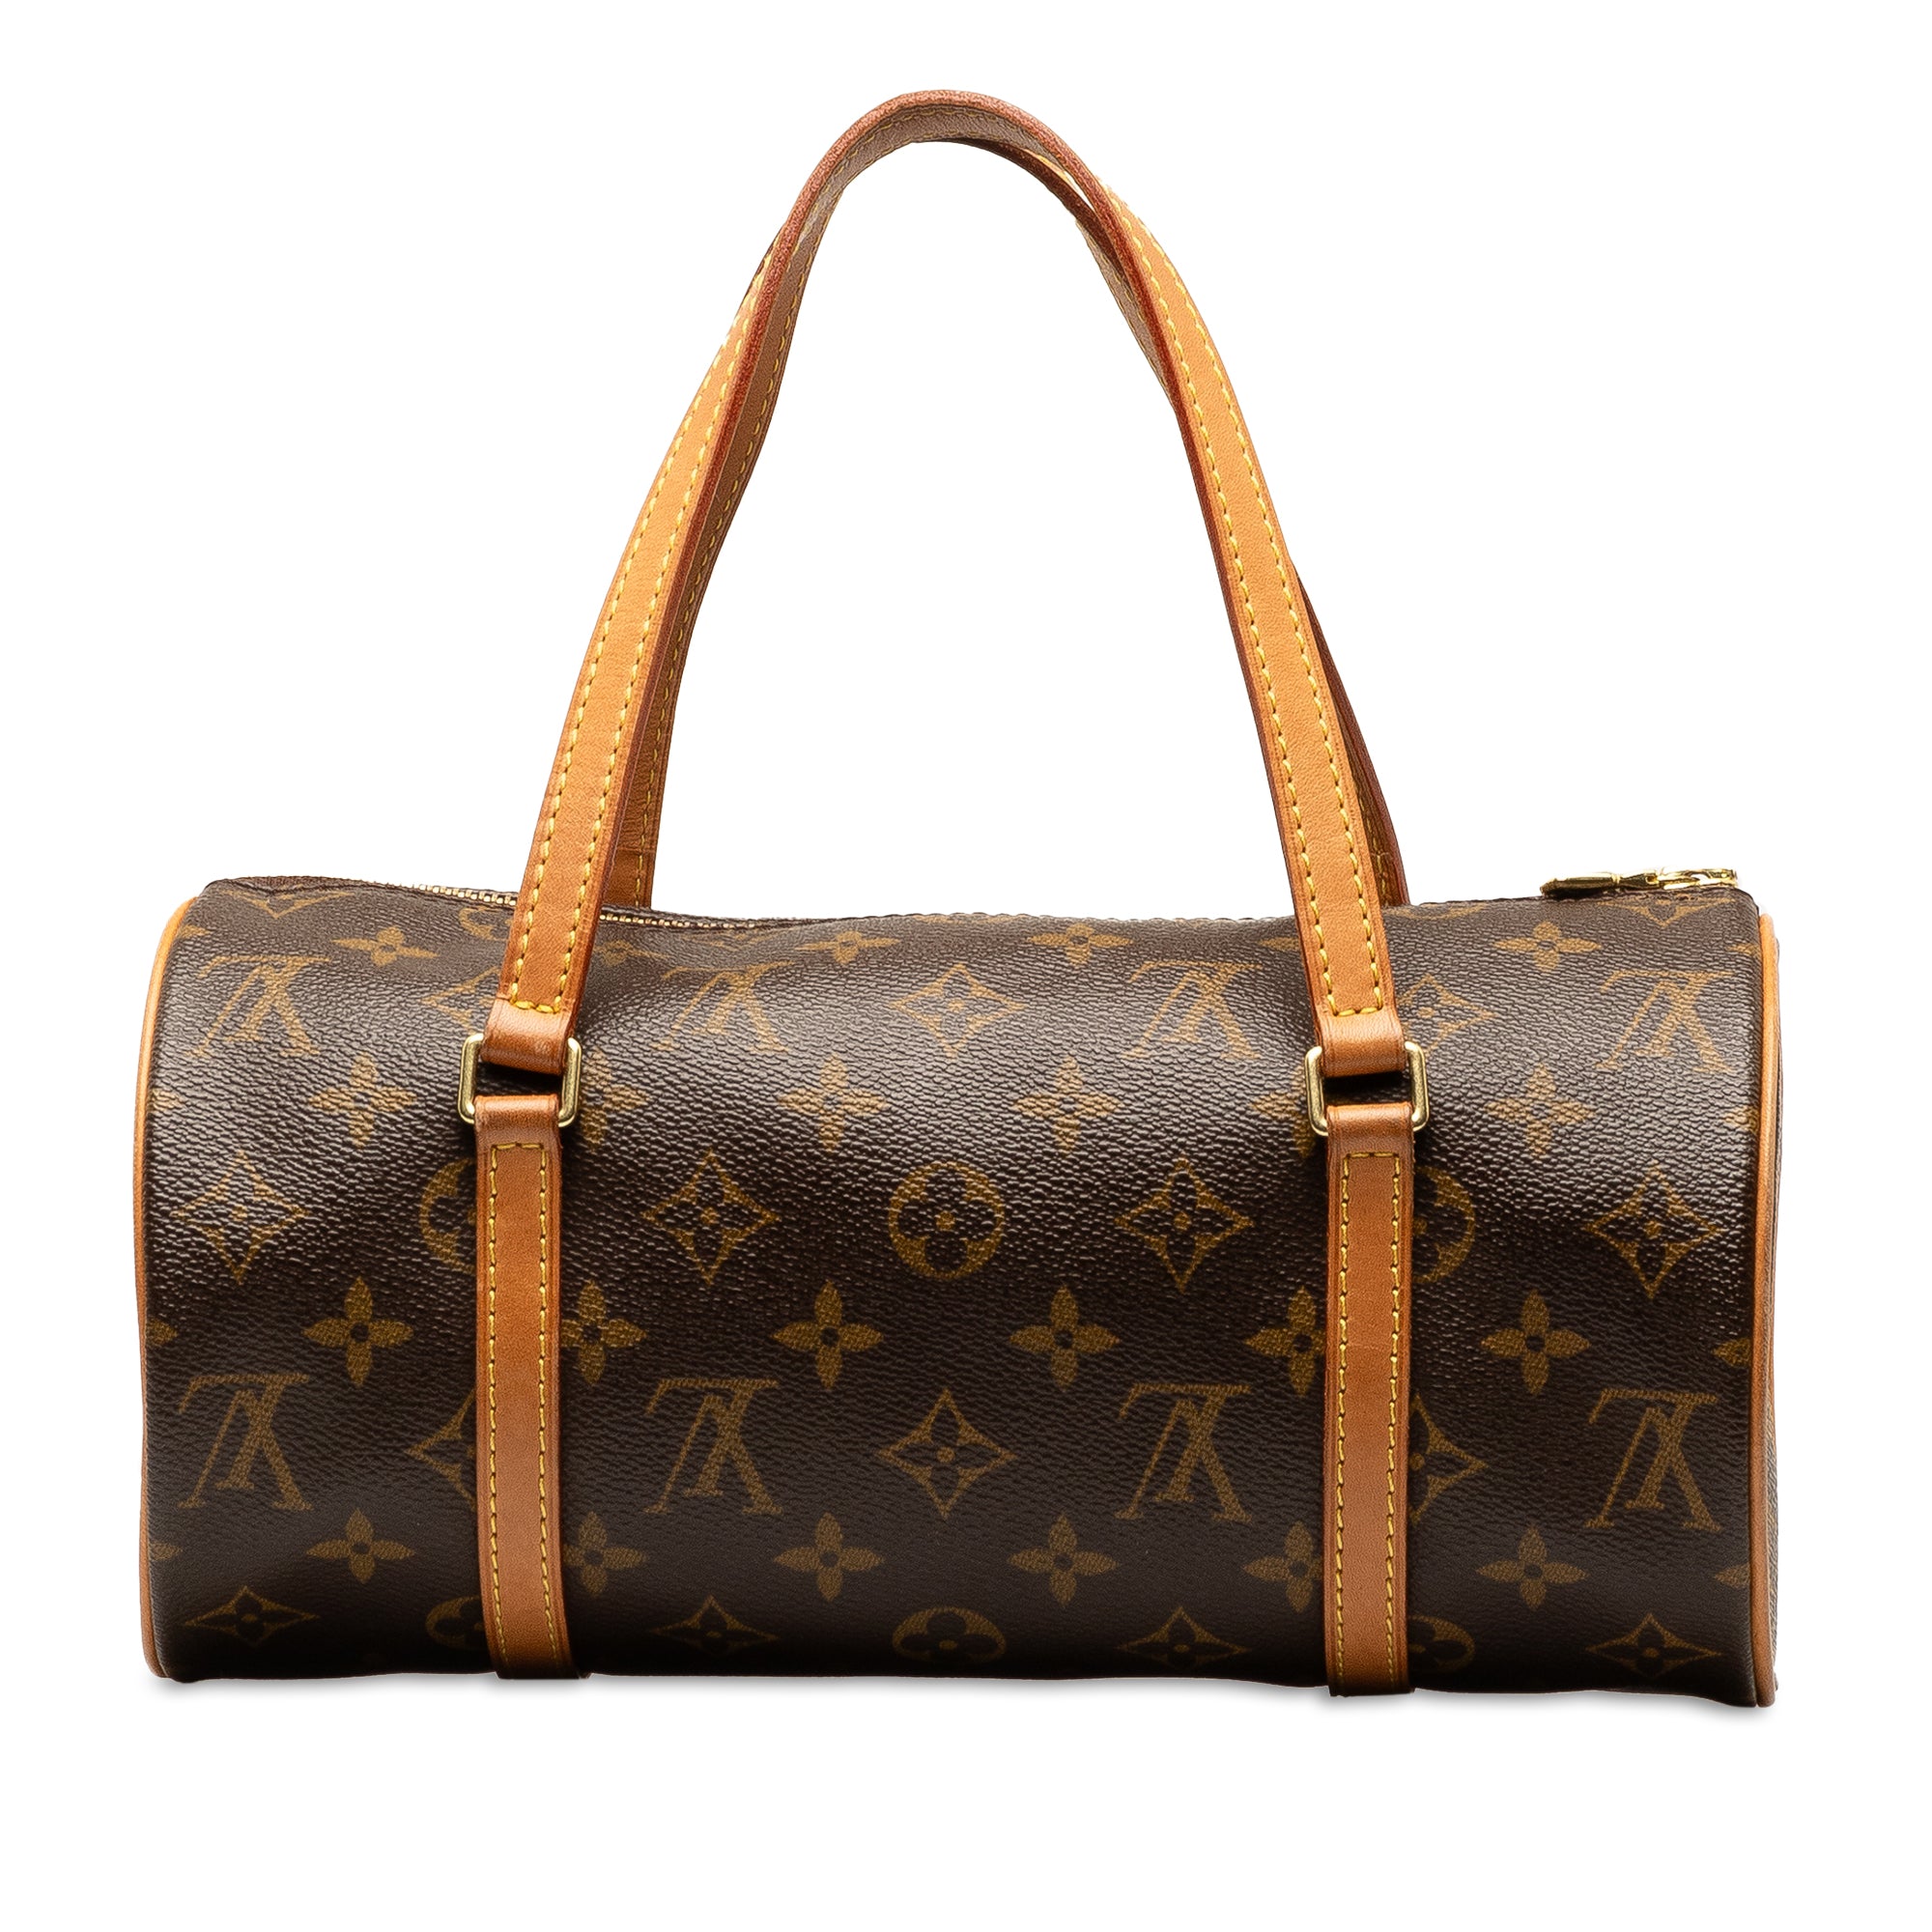 Louis Vuitton XS shoulder bag in brown mahina leather